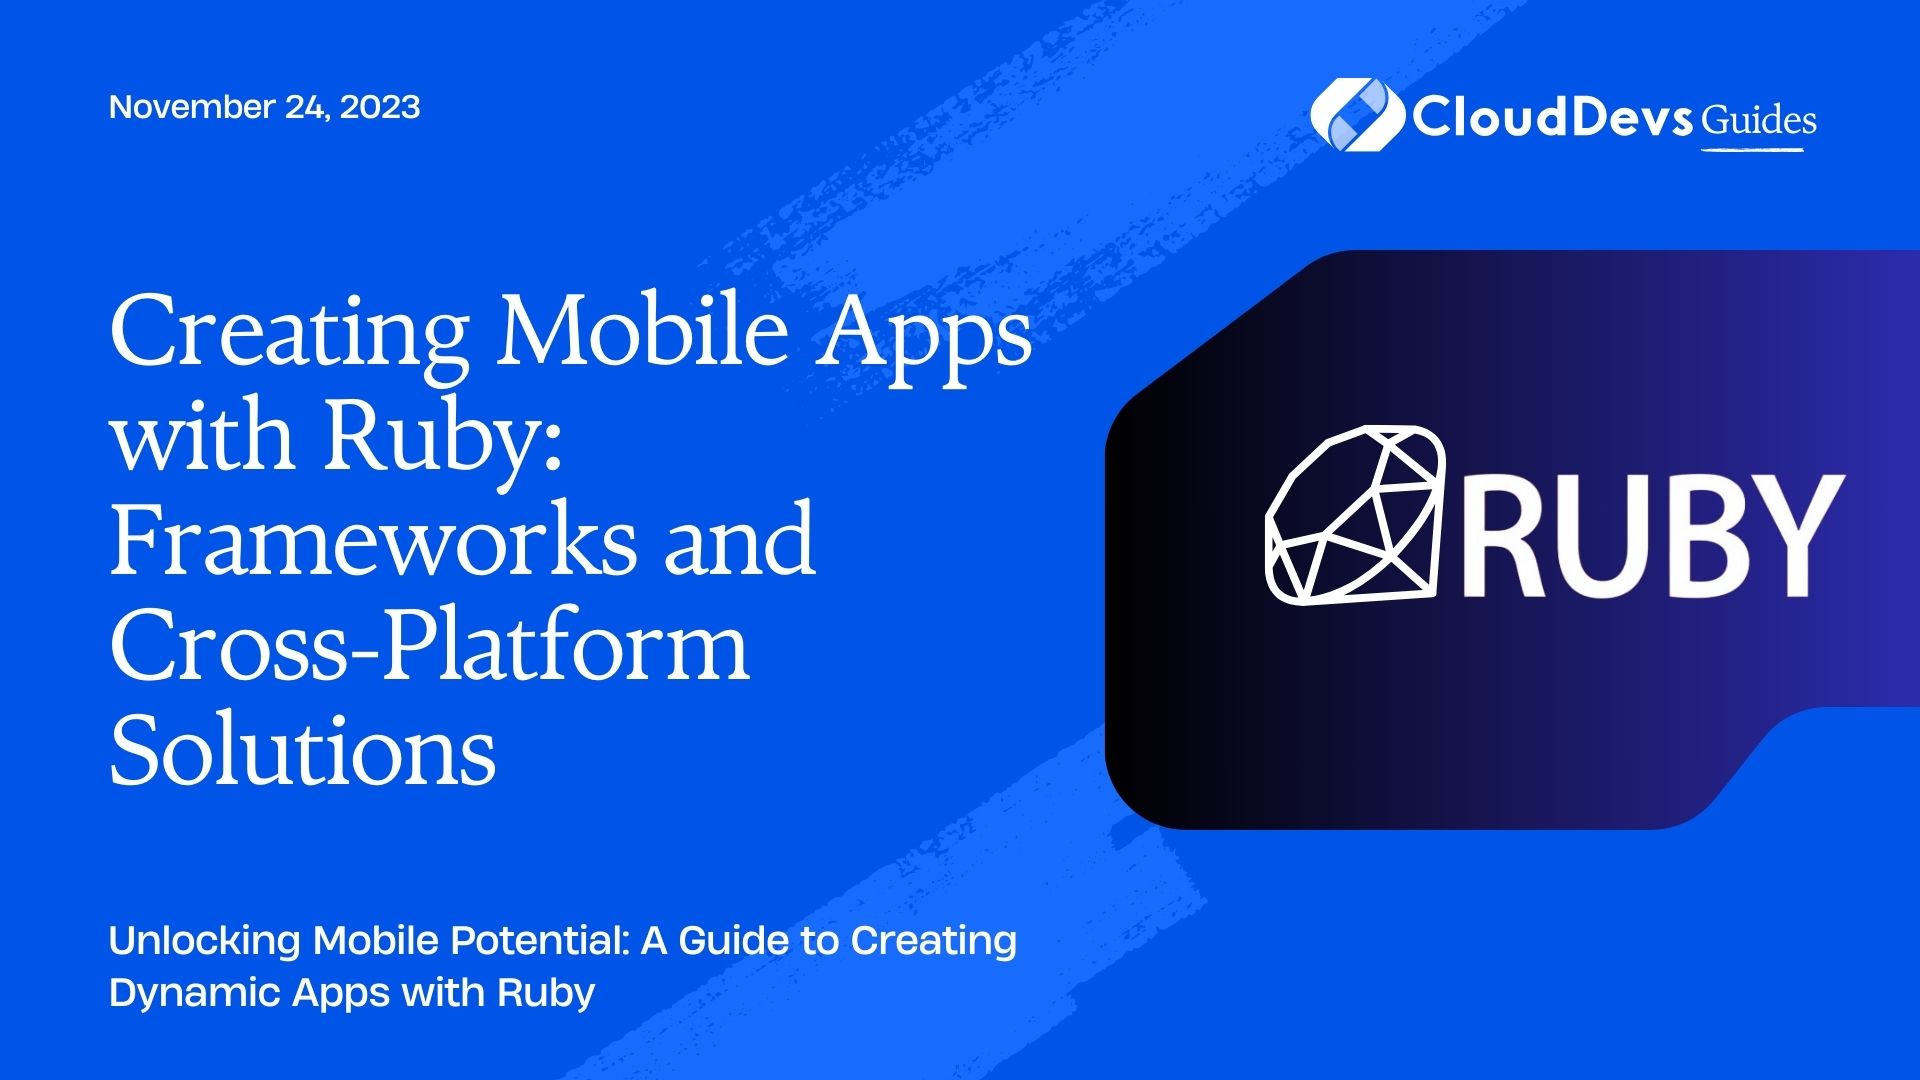 Creating Mobile Apps with Ruby: Frameworks and Cross-Platform Solutions